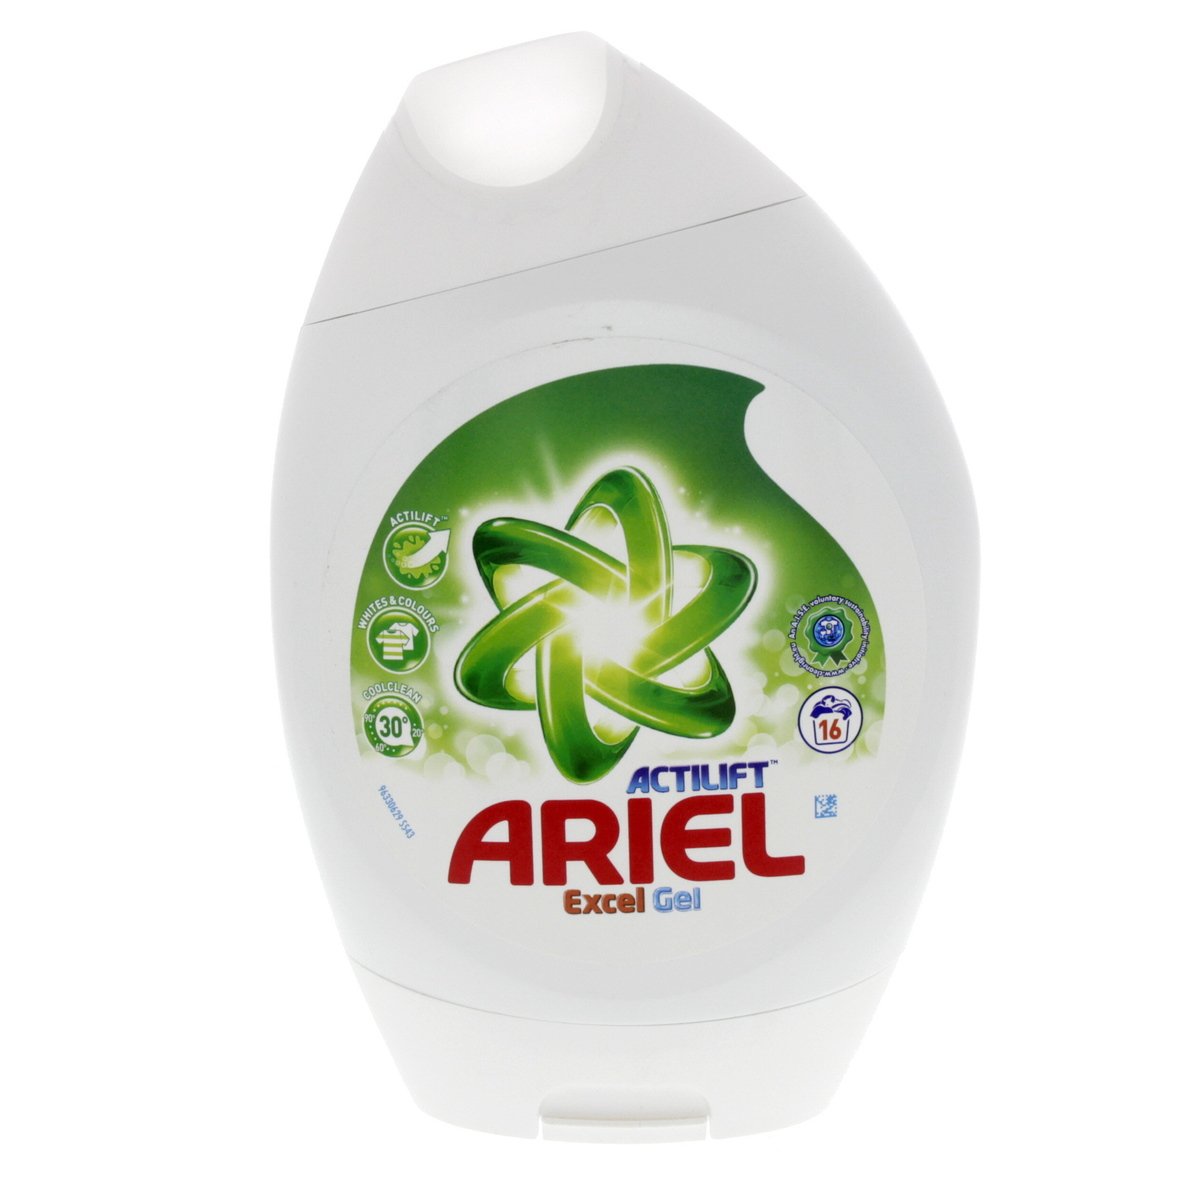 Ariel Act lift Excel Biological Laundry Gel 592ml